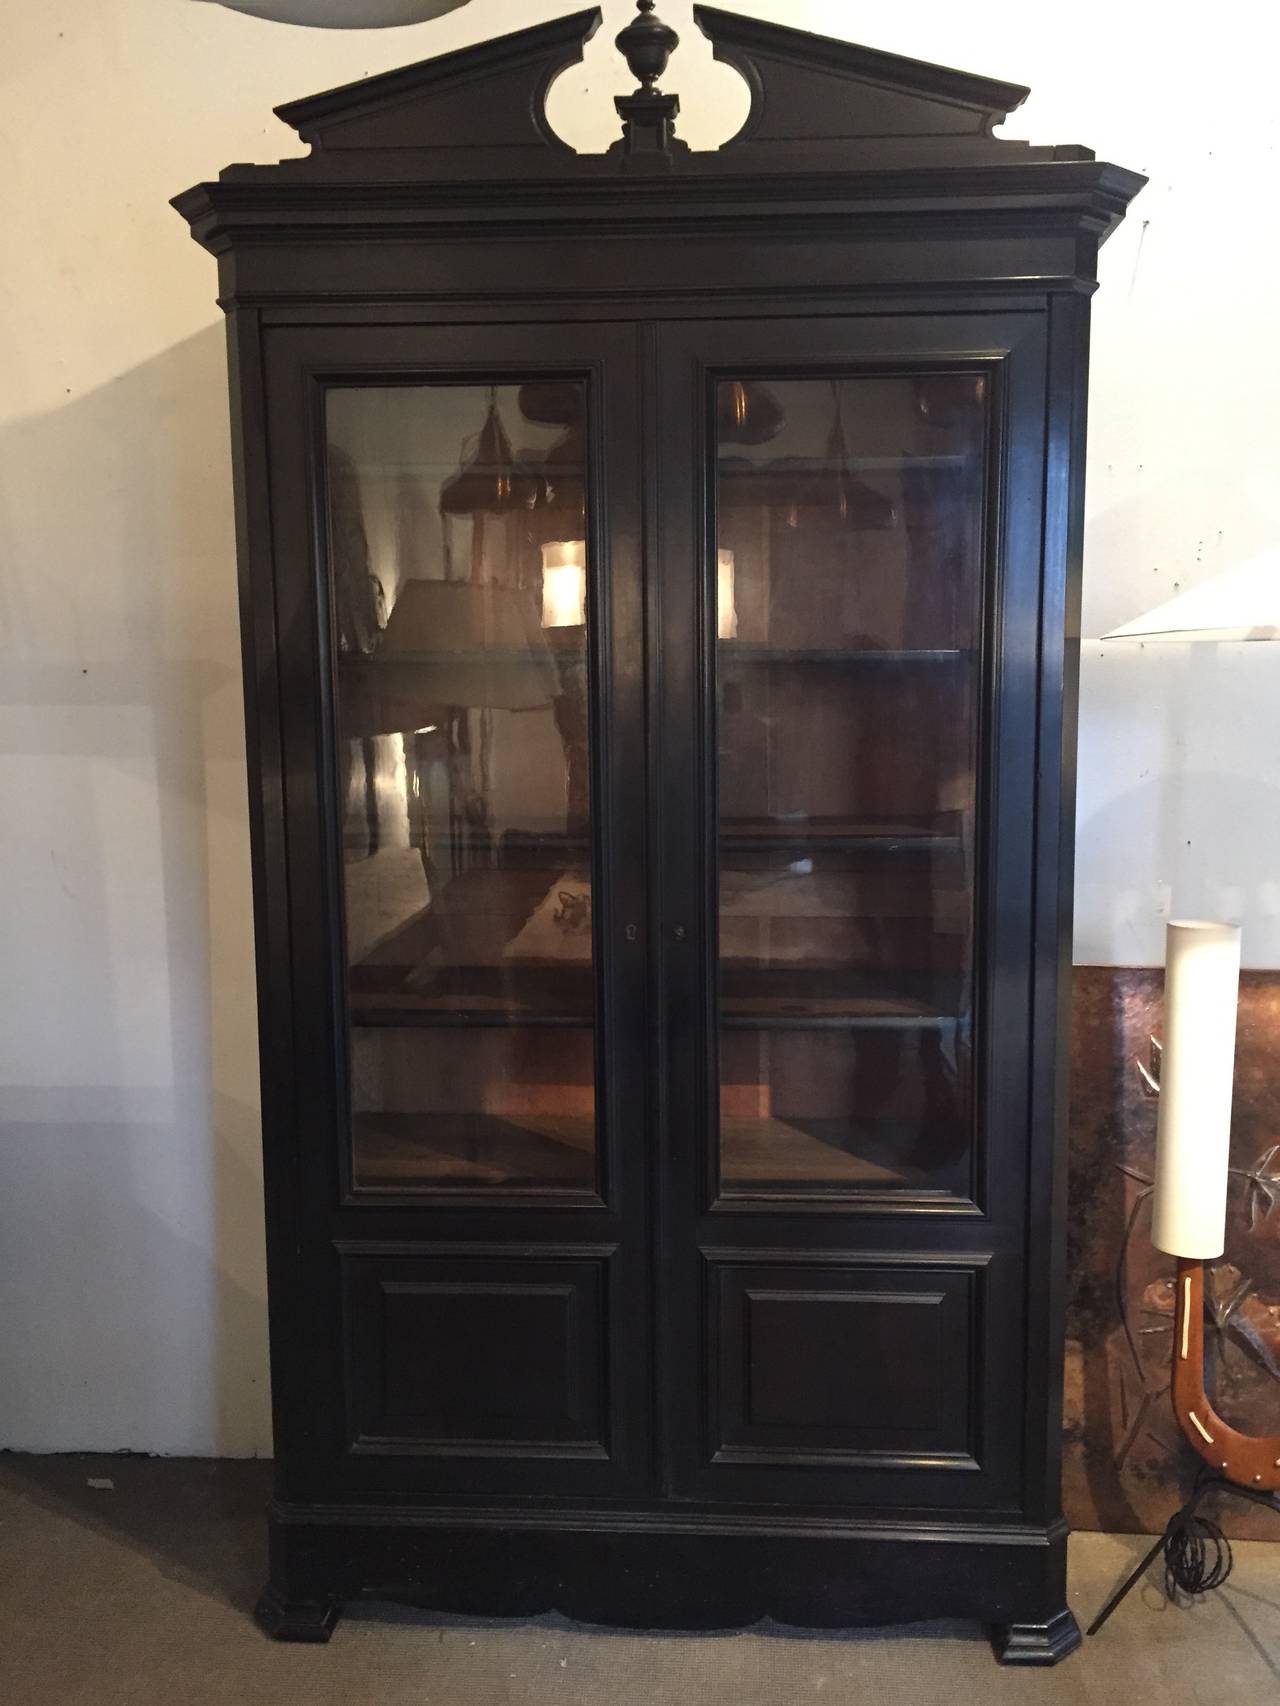 nice French ebonised bookcase whit old glass in very good original condition and quality circa 1890

Dim = 238 X 135 X 56 cm